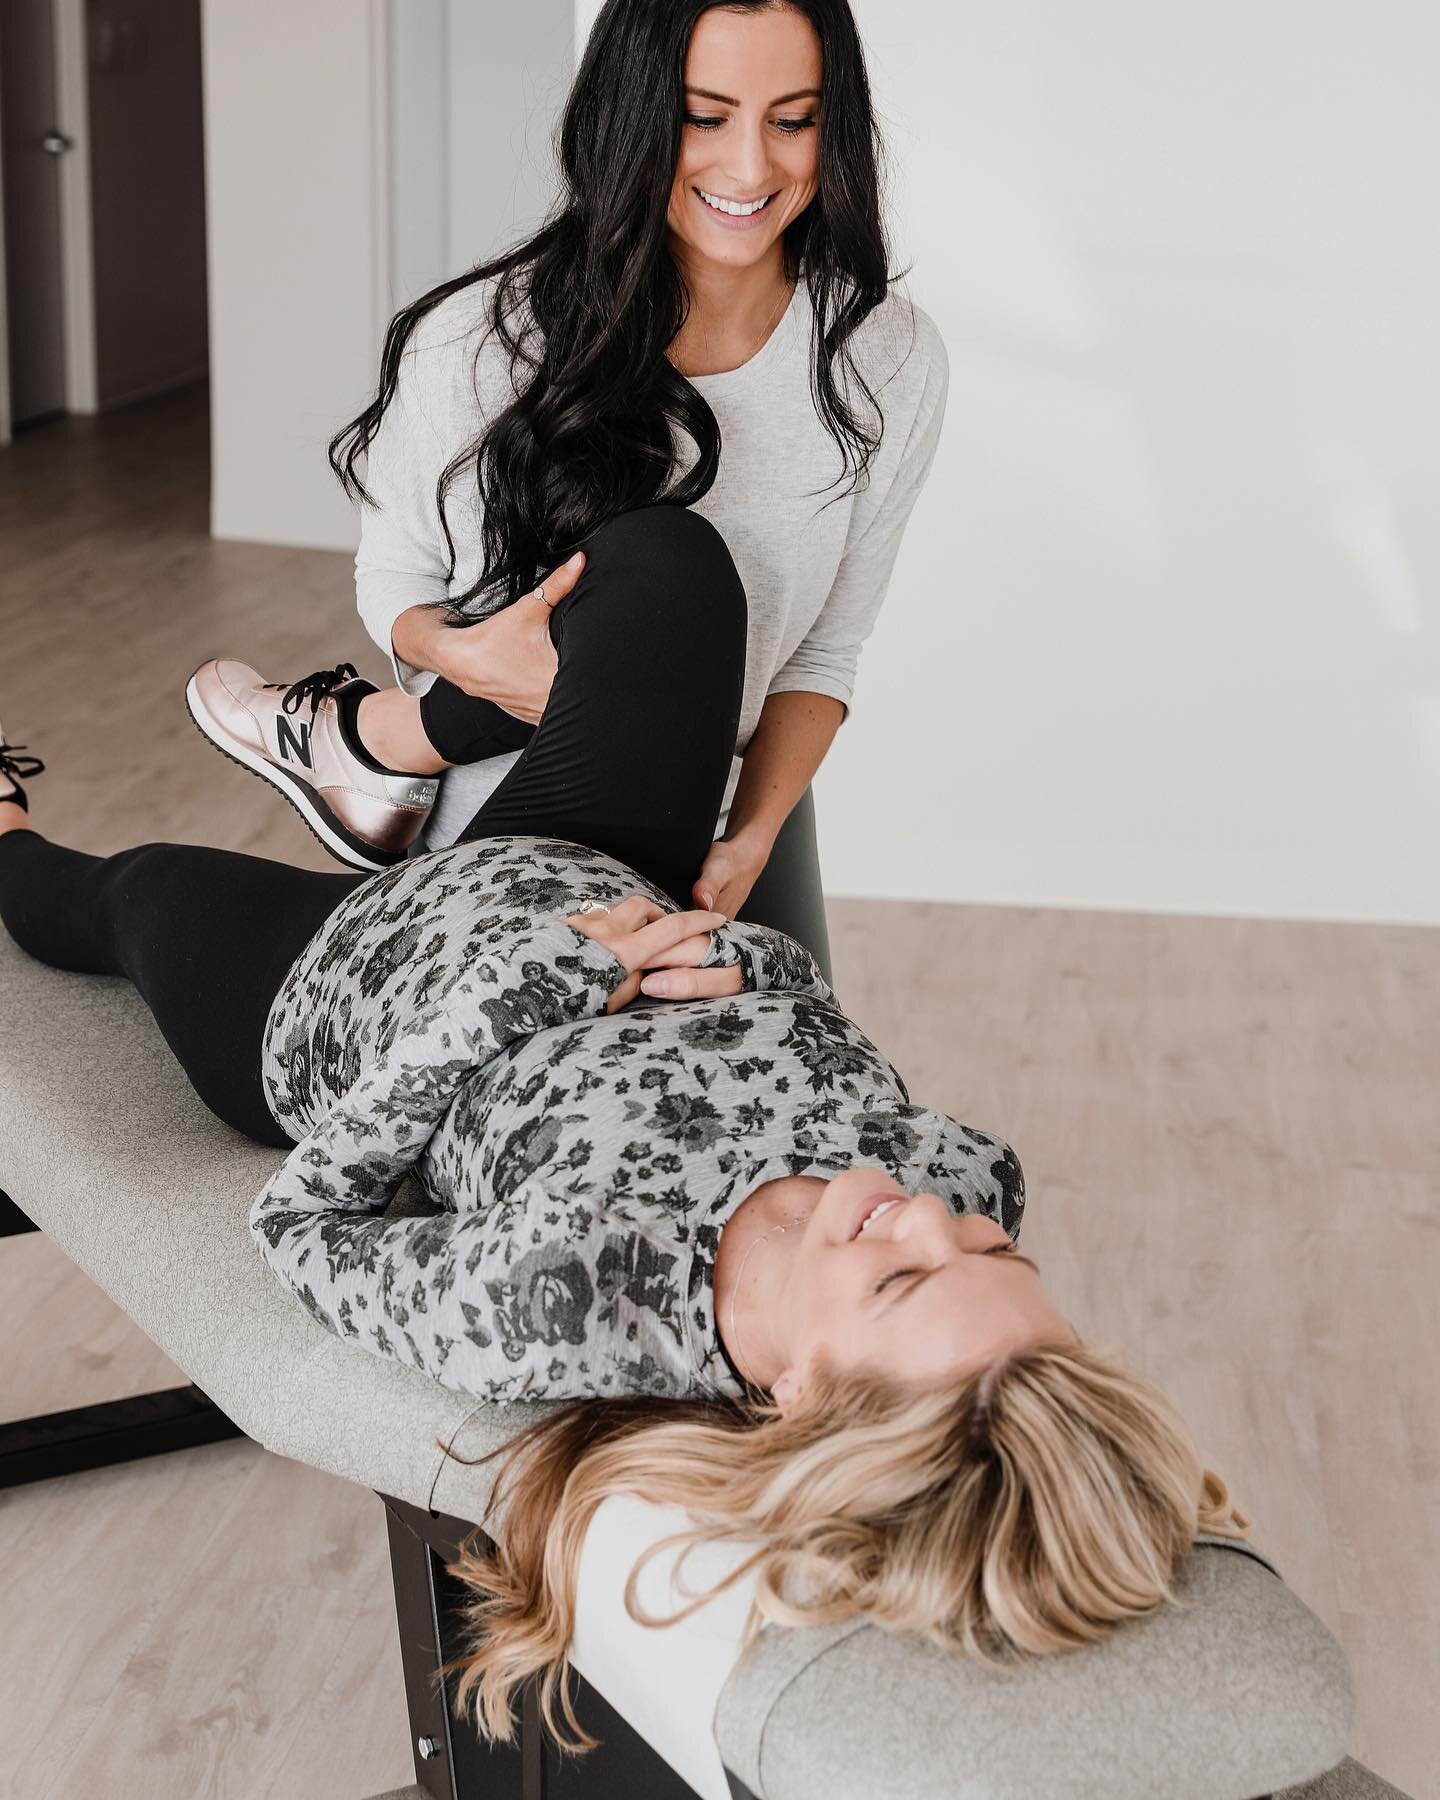 Stretching during pregnancy can offer so many A M A Z I N G benefits, especially when practiced daily! Many pregnant women find that stretching regularly can help...

&bull; relieve lower back tightness 
&bull; decrease cramping
&bull; increase energ